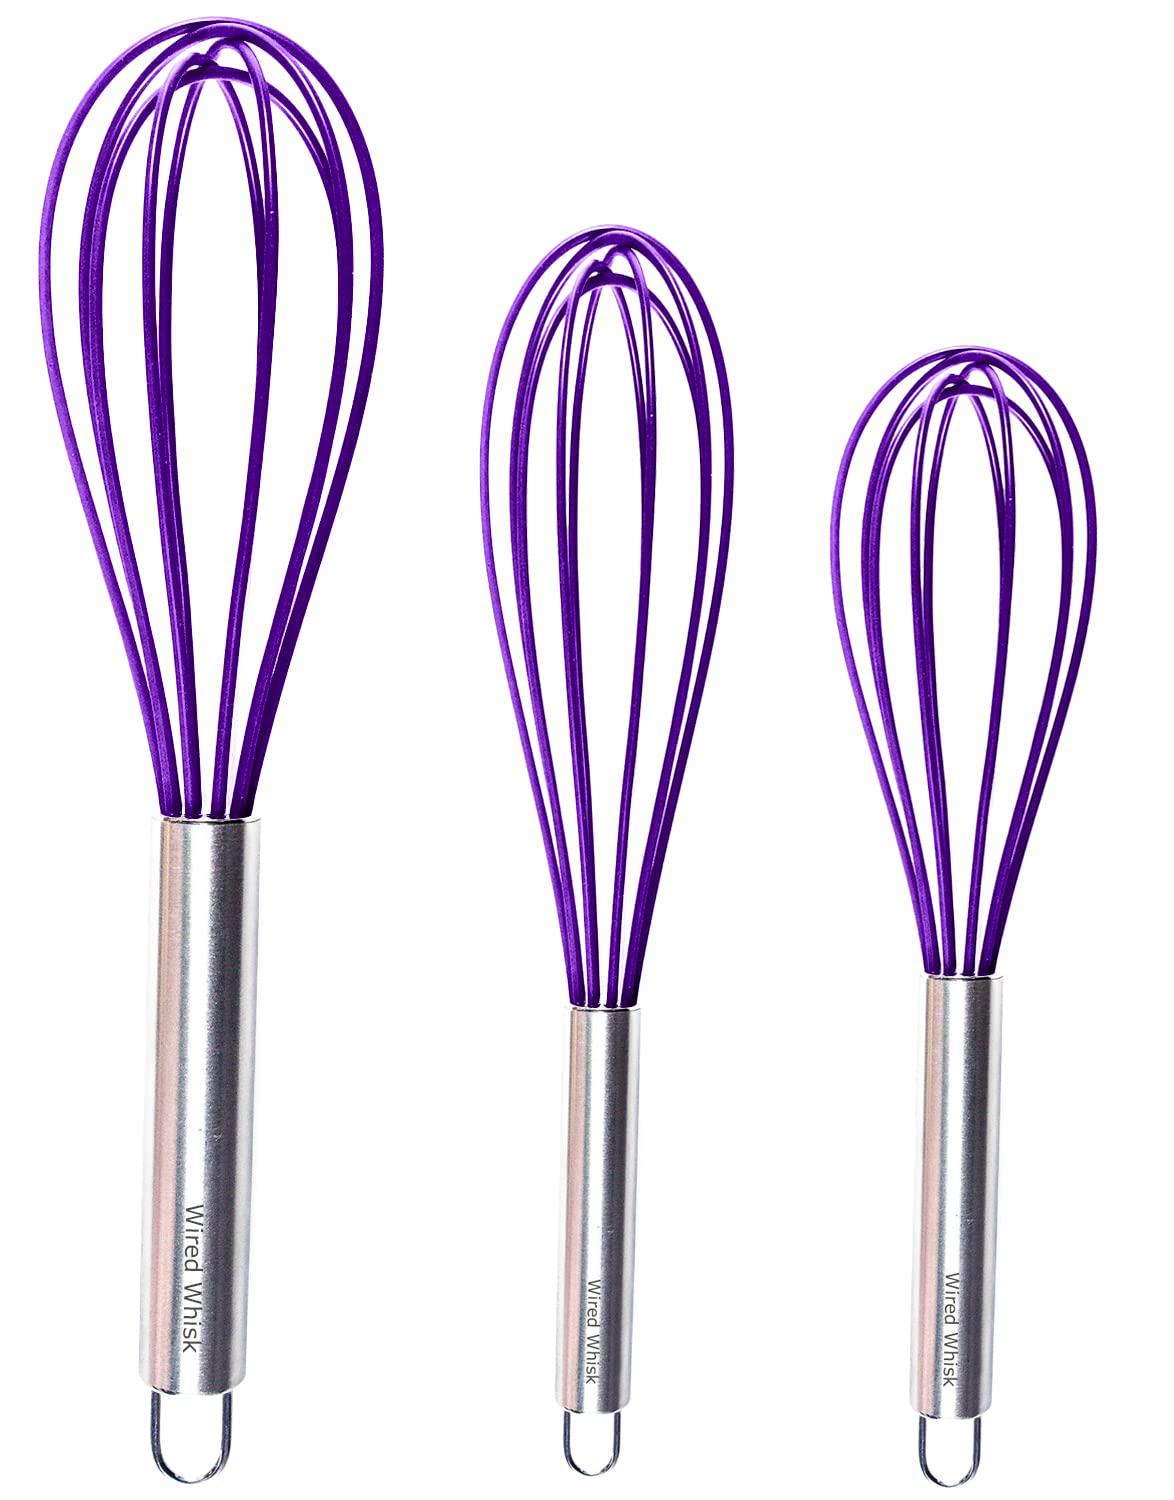 Wired Whisk silicone whisk set of 3 - stainless steel & silicone non-stick coating - colored balloon egg beater for blending, whisking, b